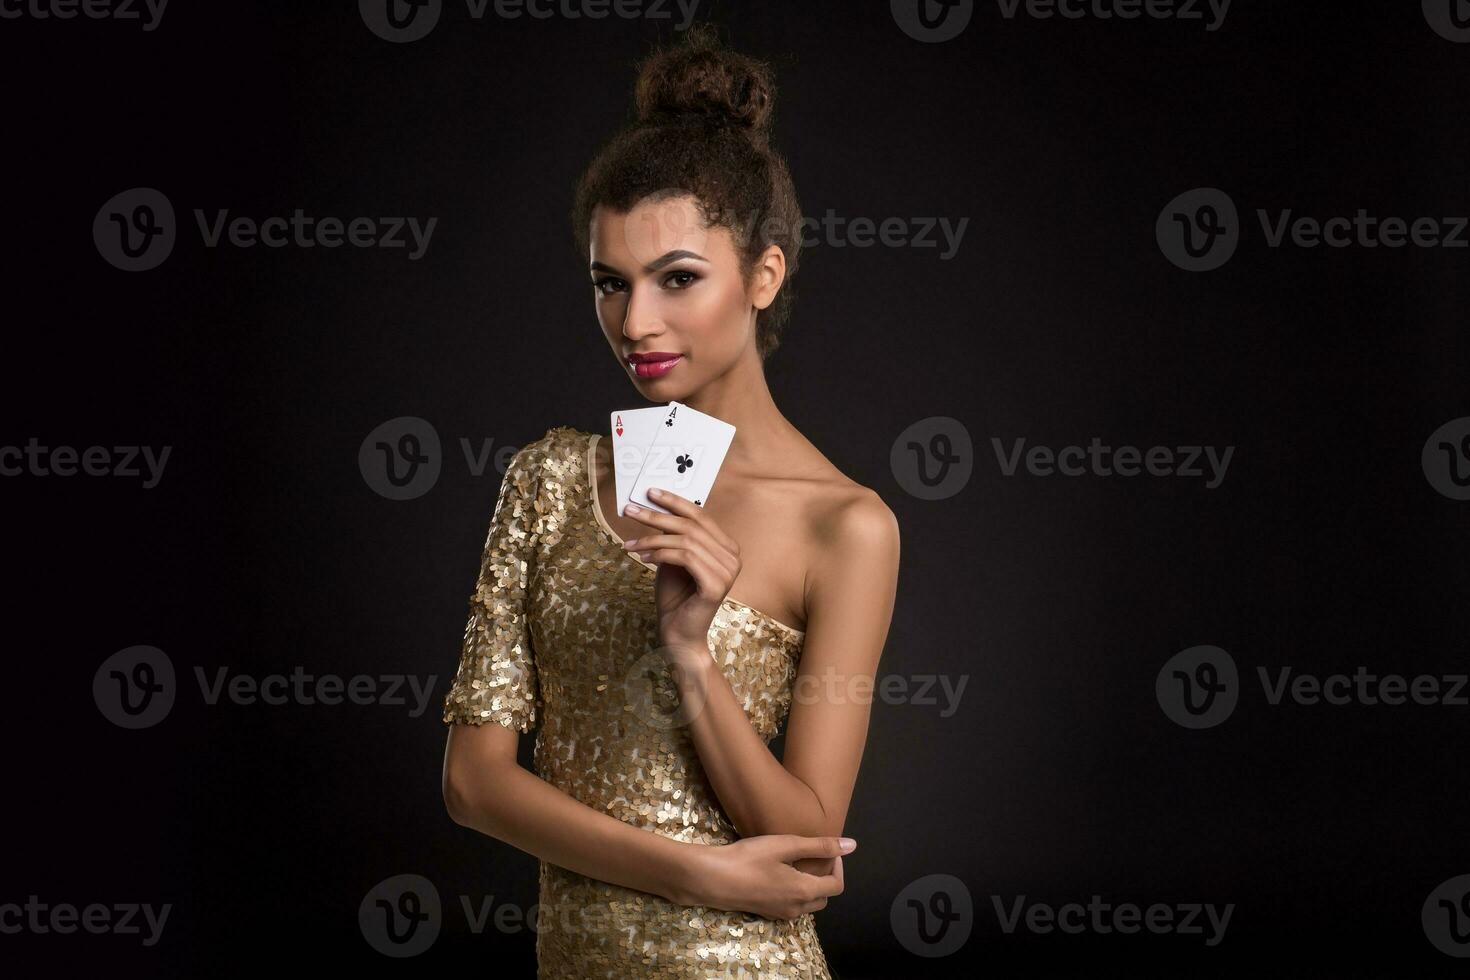 Woman winning - Young woman in a classy gold dress holding two aces, a poker of aces card combination. photo